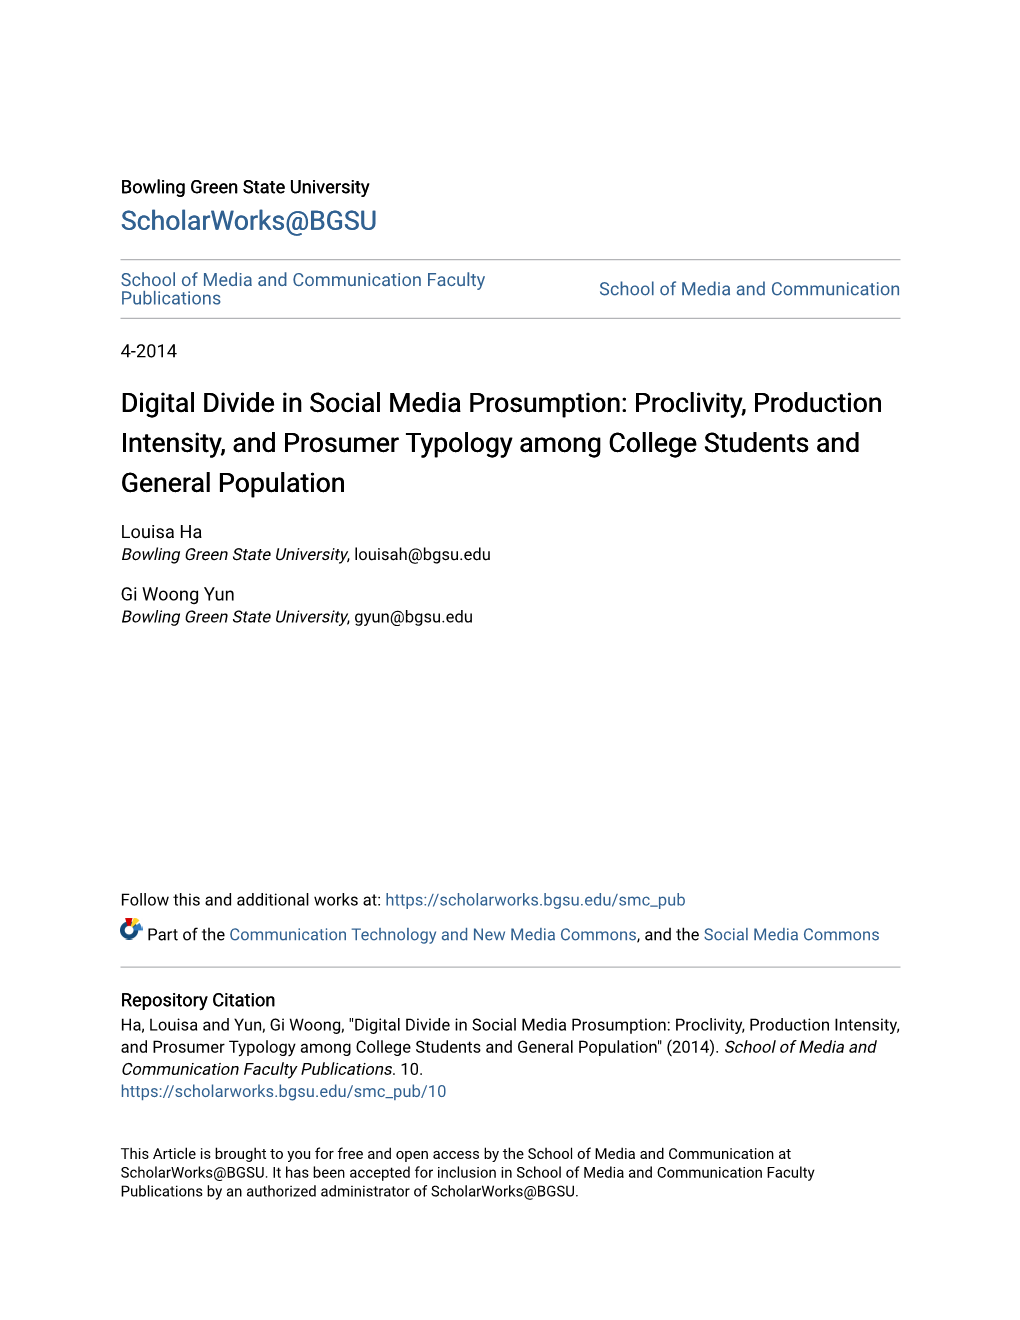 Digital Divide in Social Media Prosumption: Proclivity, Production Intensity, and Prosumer Typology Among College Students and General Population